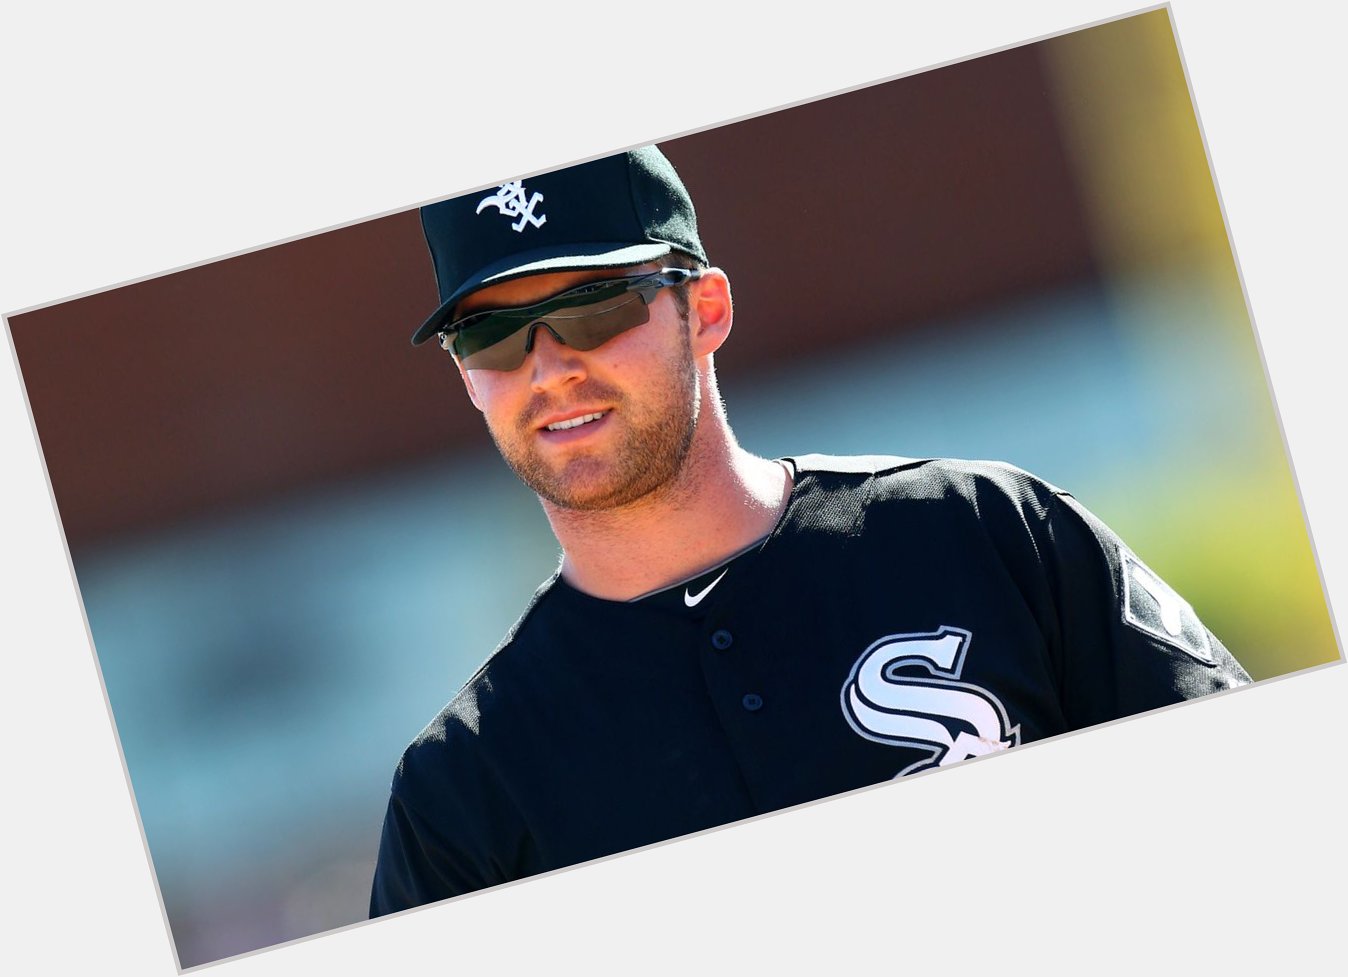 Happy 24th Birthday to Matt Davidson! With in 2014, he was a 3B/SS in 130G w/ 539PA/478AB. 